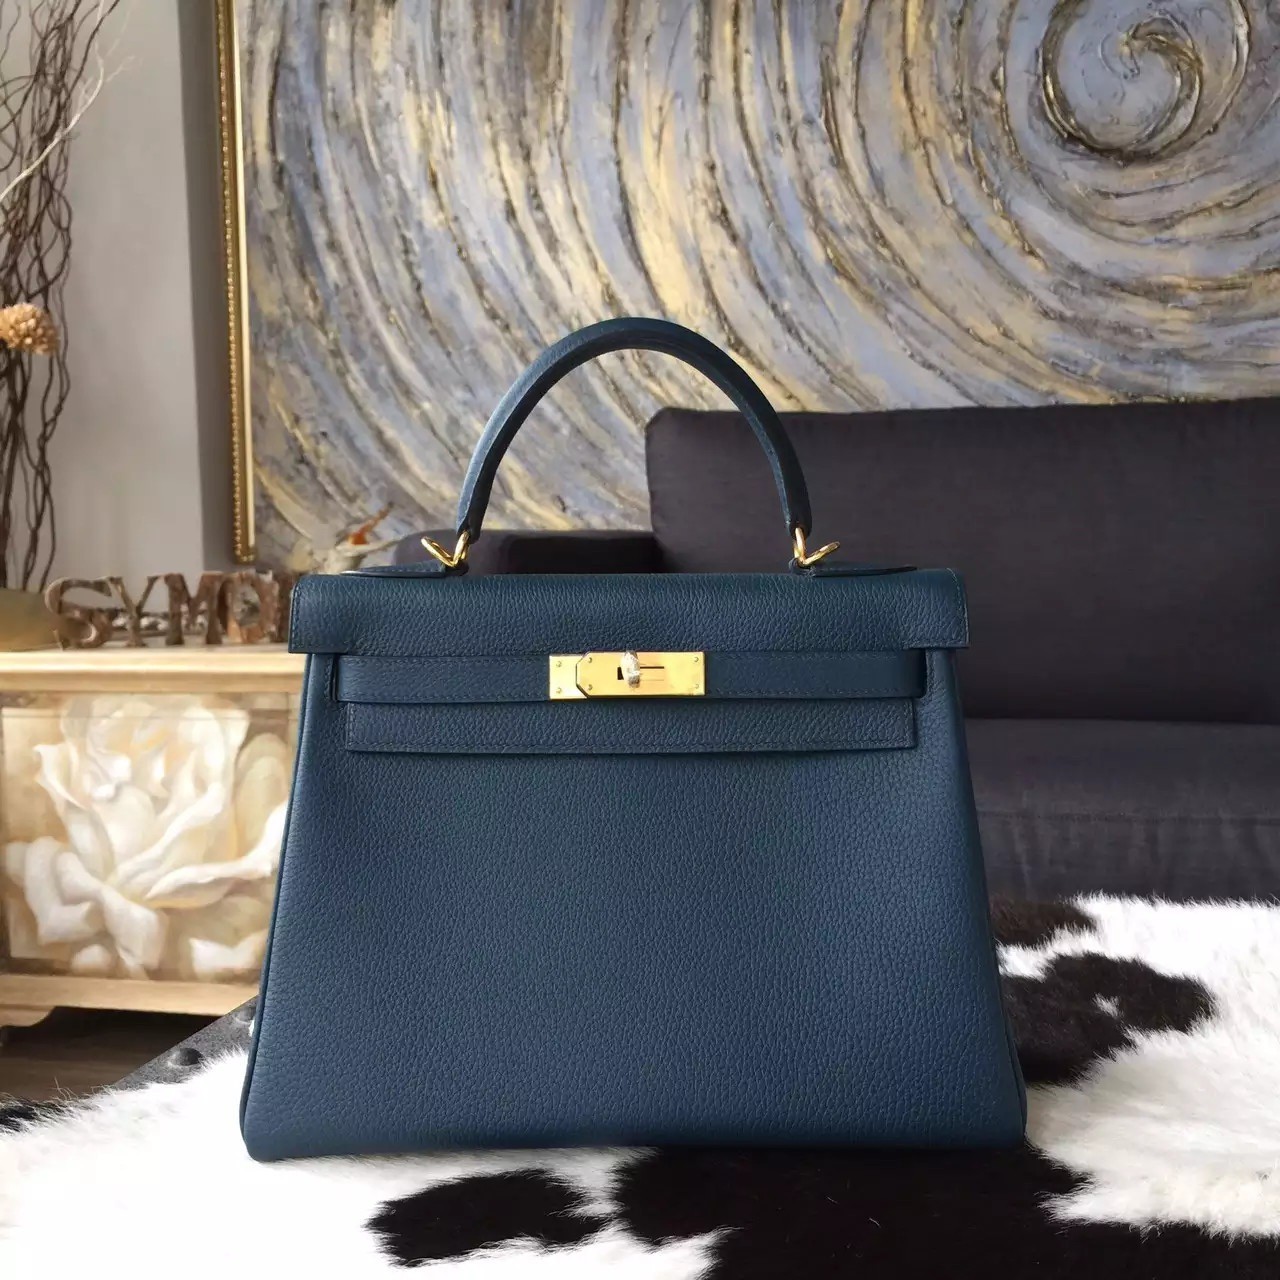 Hermes Kelly 25cm Epsom Calfskin Bag Handstitched Palladium Hardware, Etoupe  CK18 RS03907 Replica Sale Online With Cheap Price